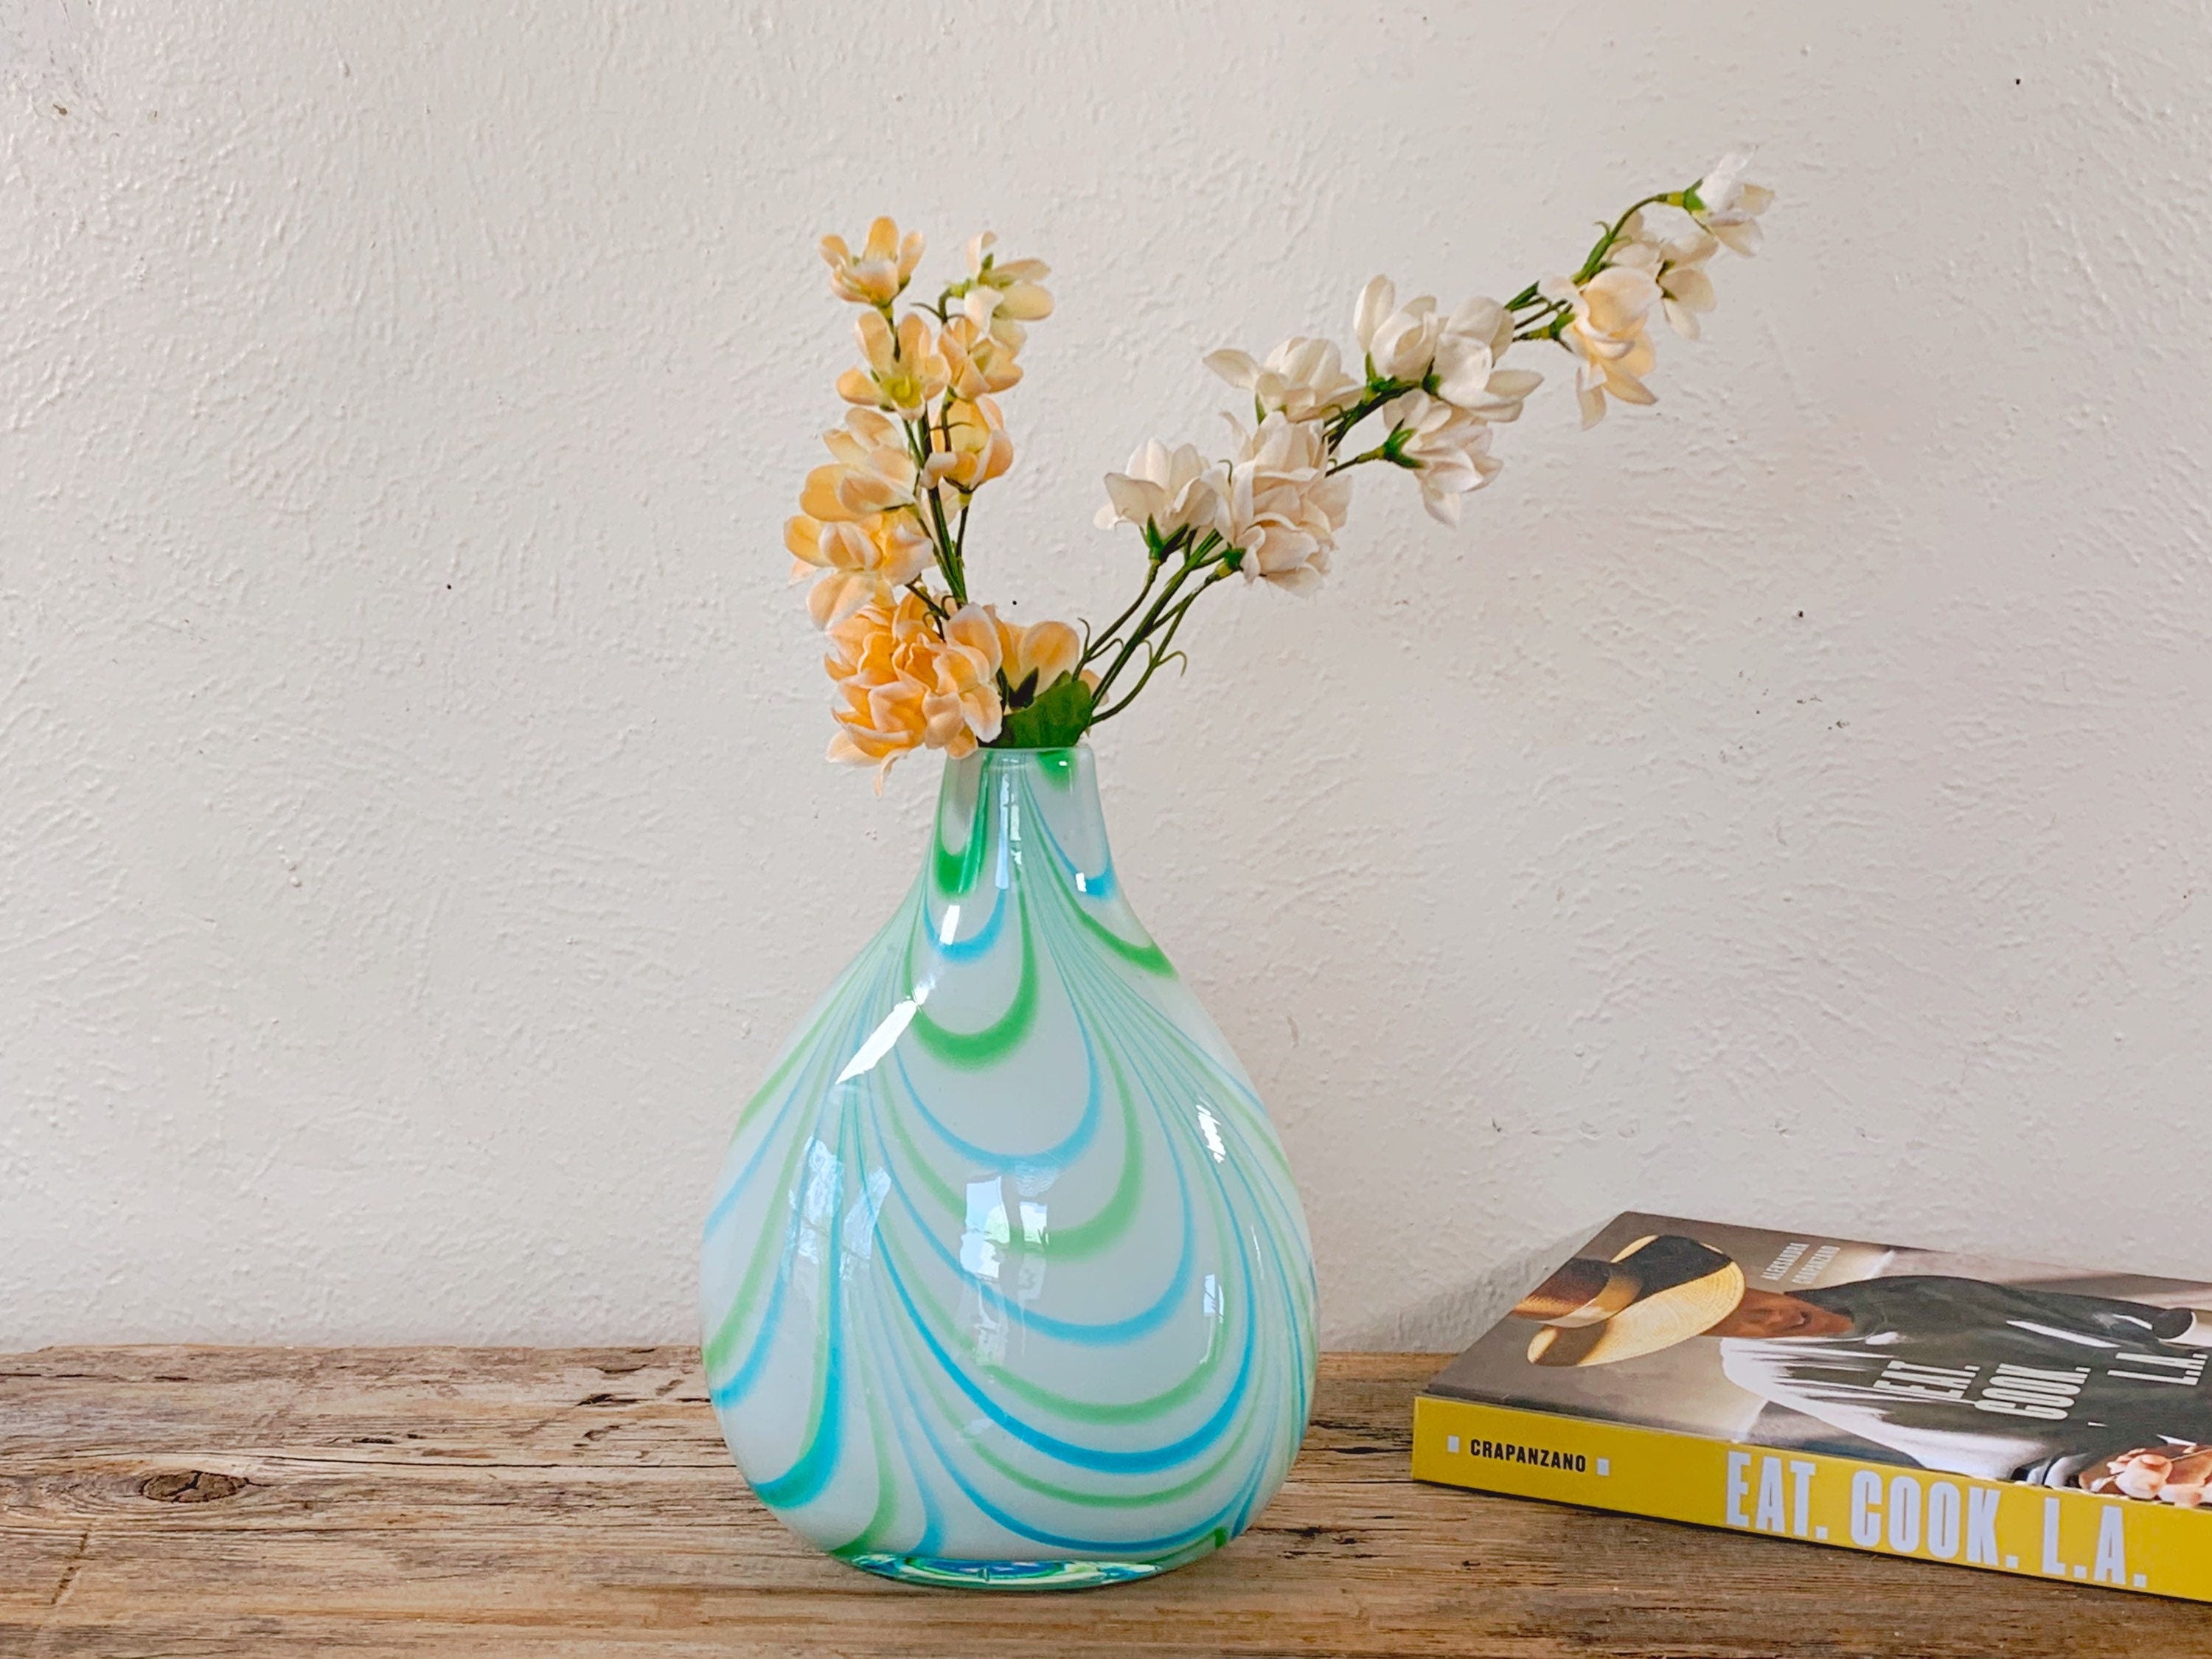 Vintage Hand Blown Studio Art Glass Vase with Blue and Green Candy Stripes | Flower Vase Contemporary Home Decor | Mother's Day Gift